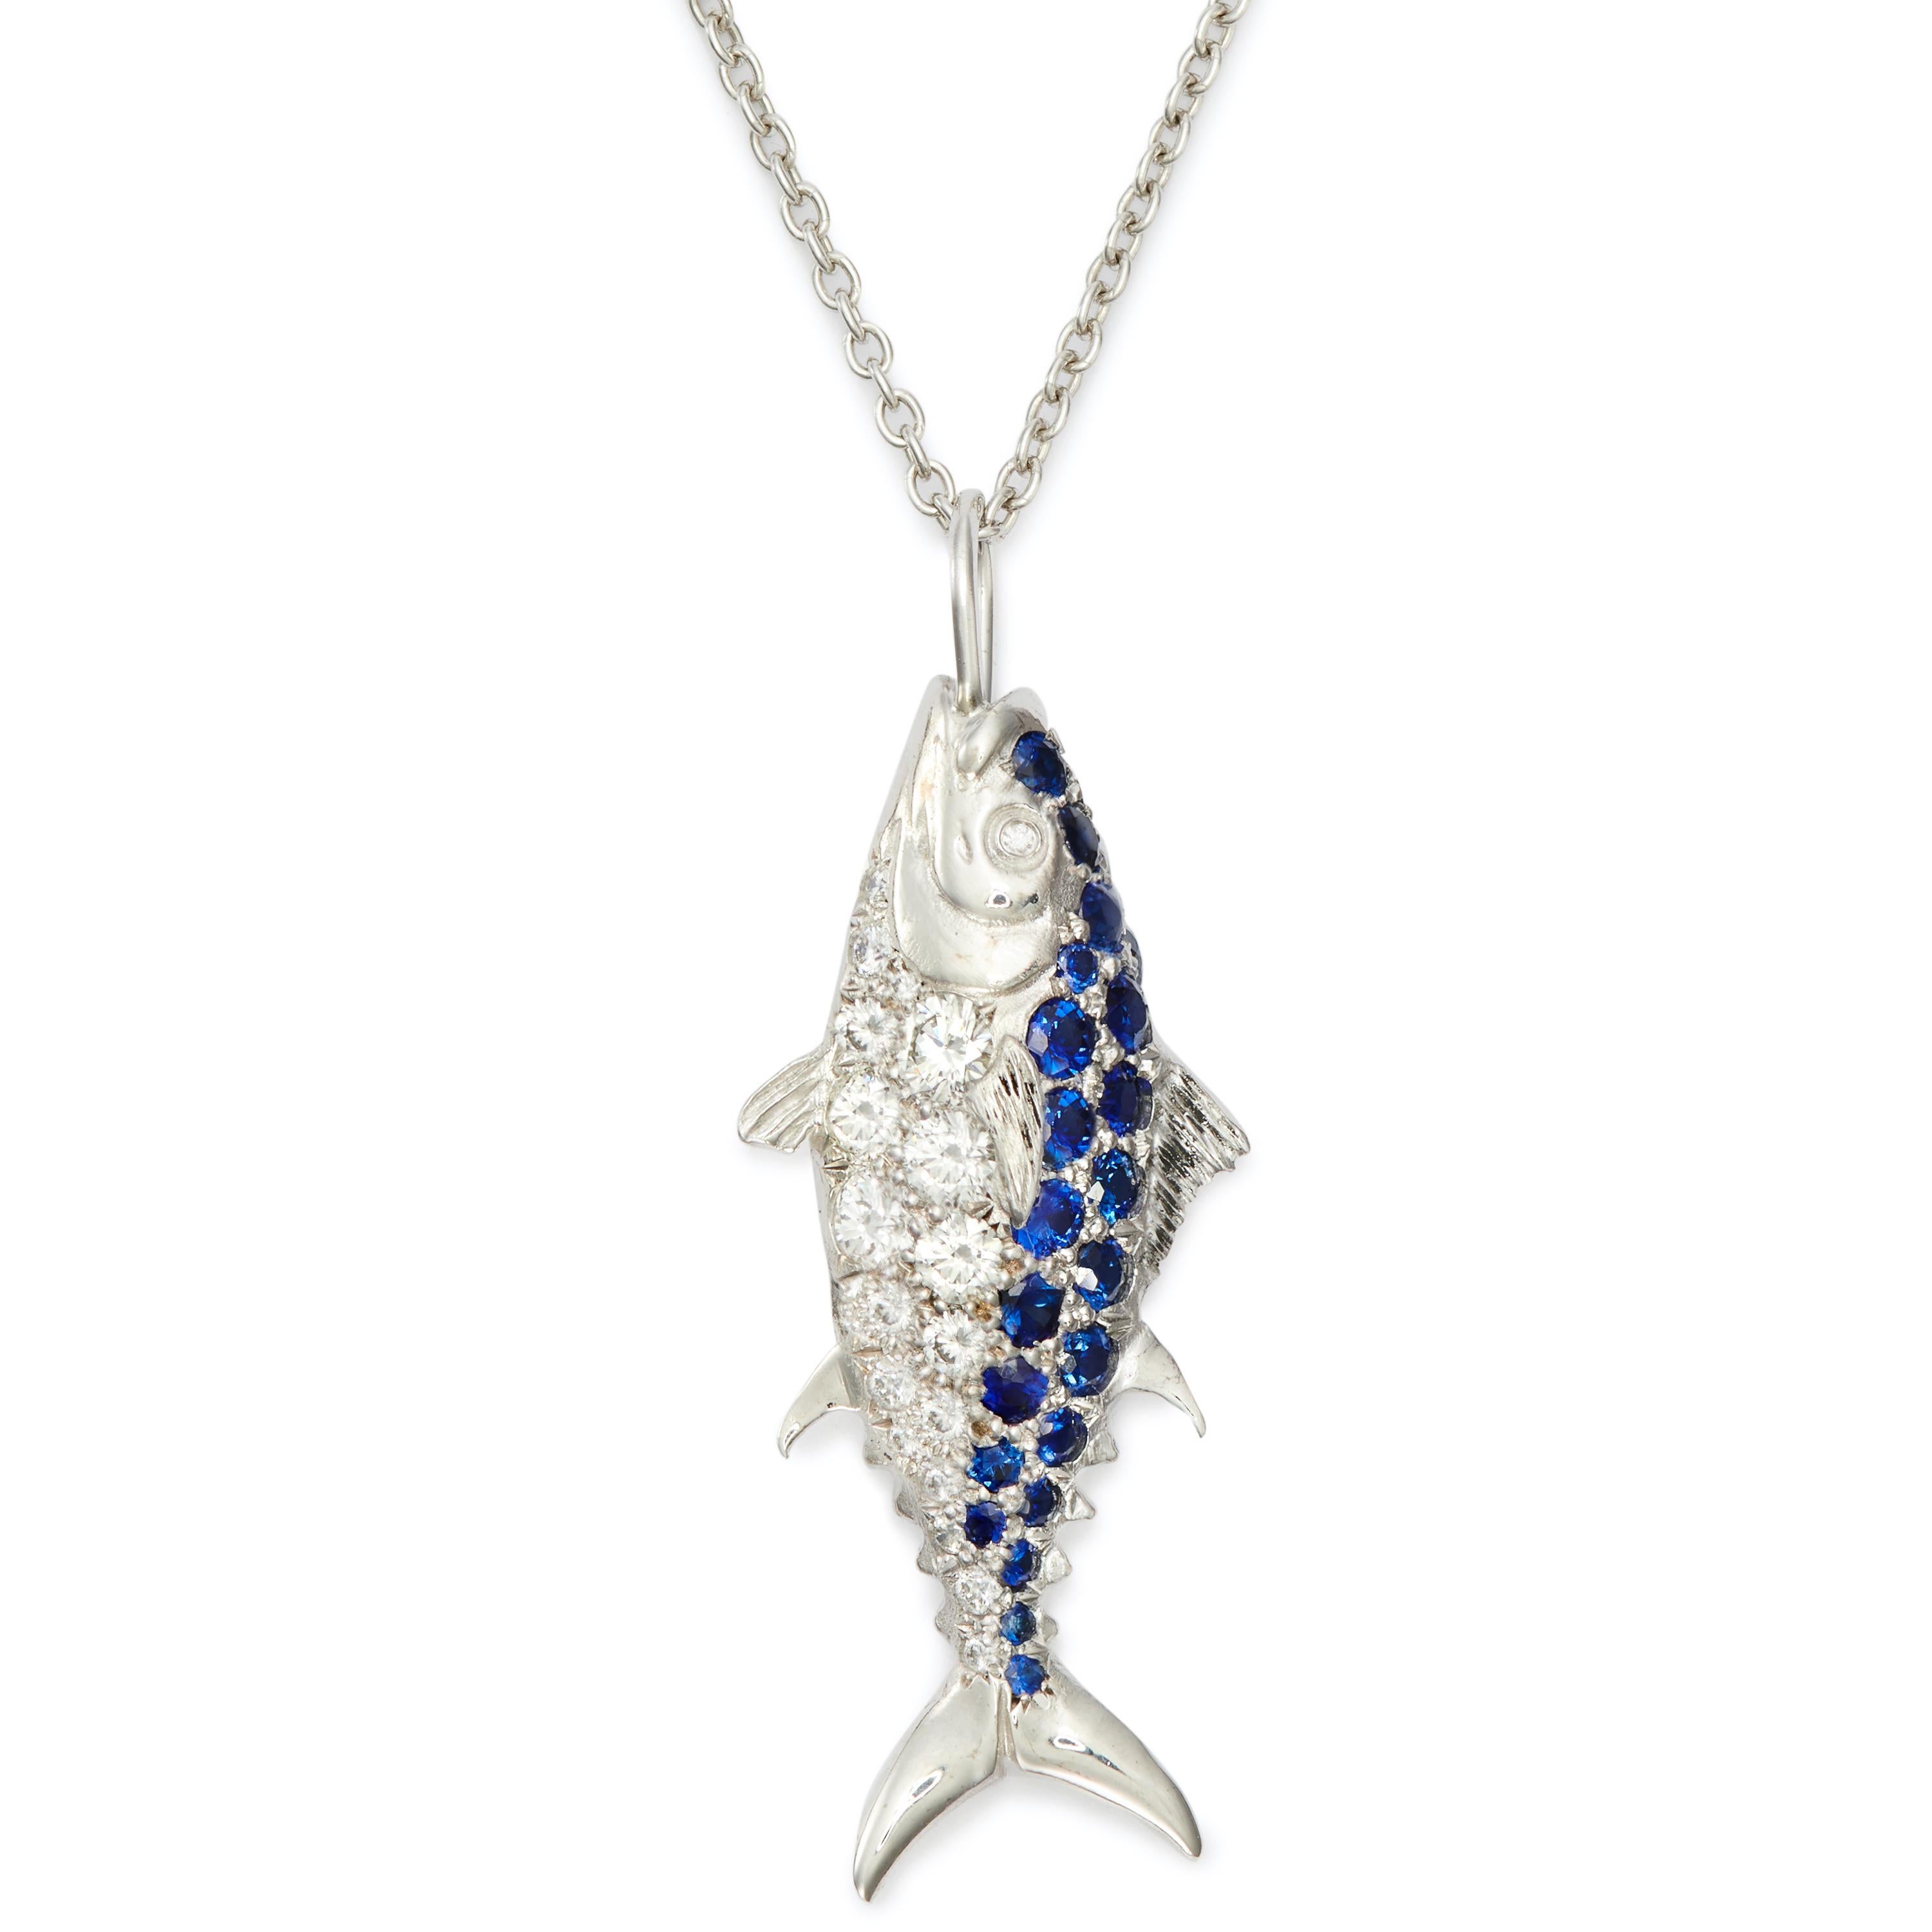 Make one your catch of the day.

18 Karat White Gold Nantucket Tuna Fish Pendant, set with Diamonds and Sapphires.

Chain and 18 Karat Gold clasp sold separately.

***Please note: The listed price reflects a single Diamond and Sapphire Pendant (as